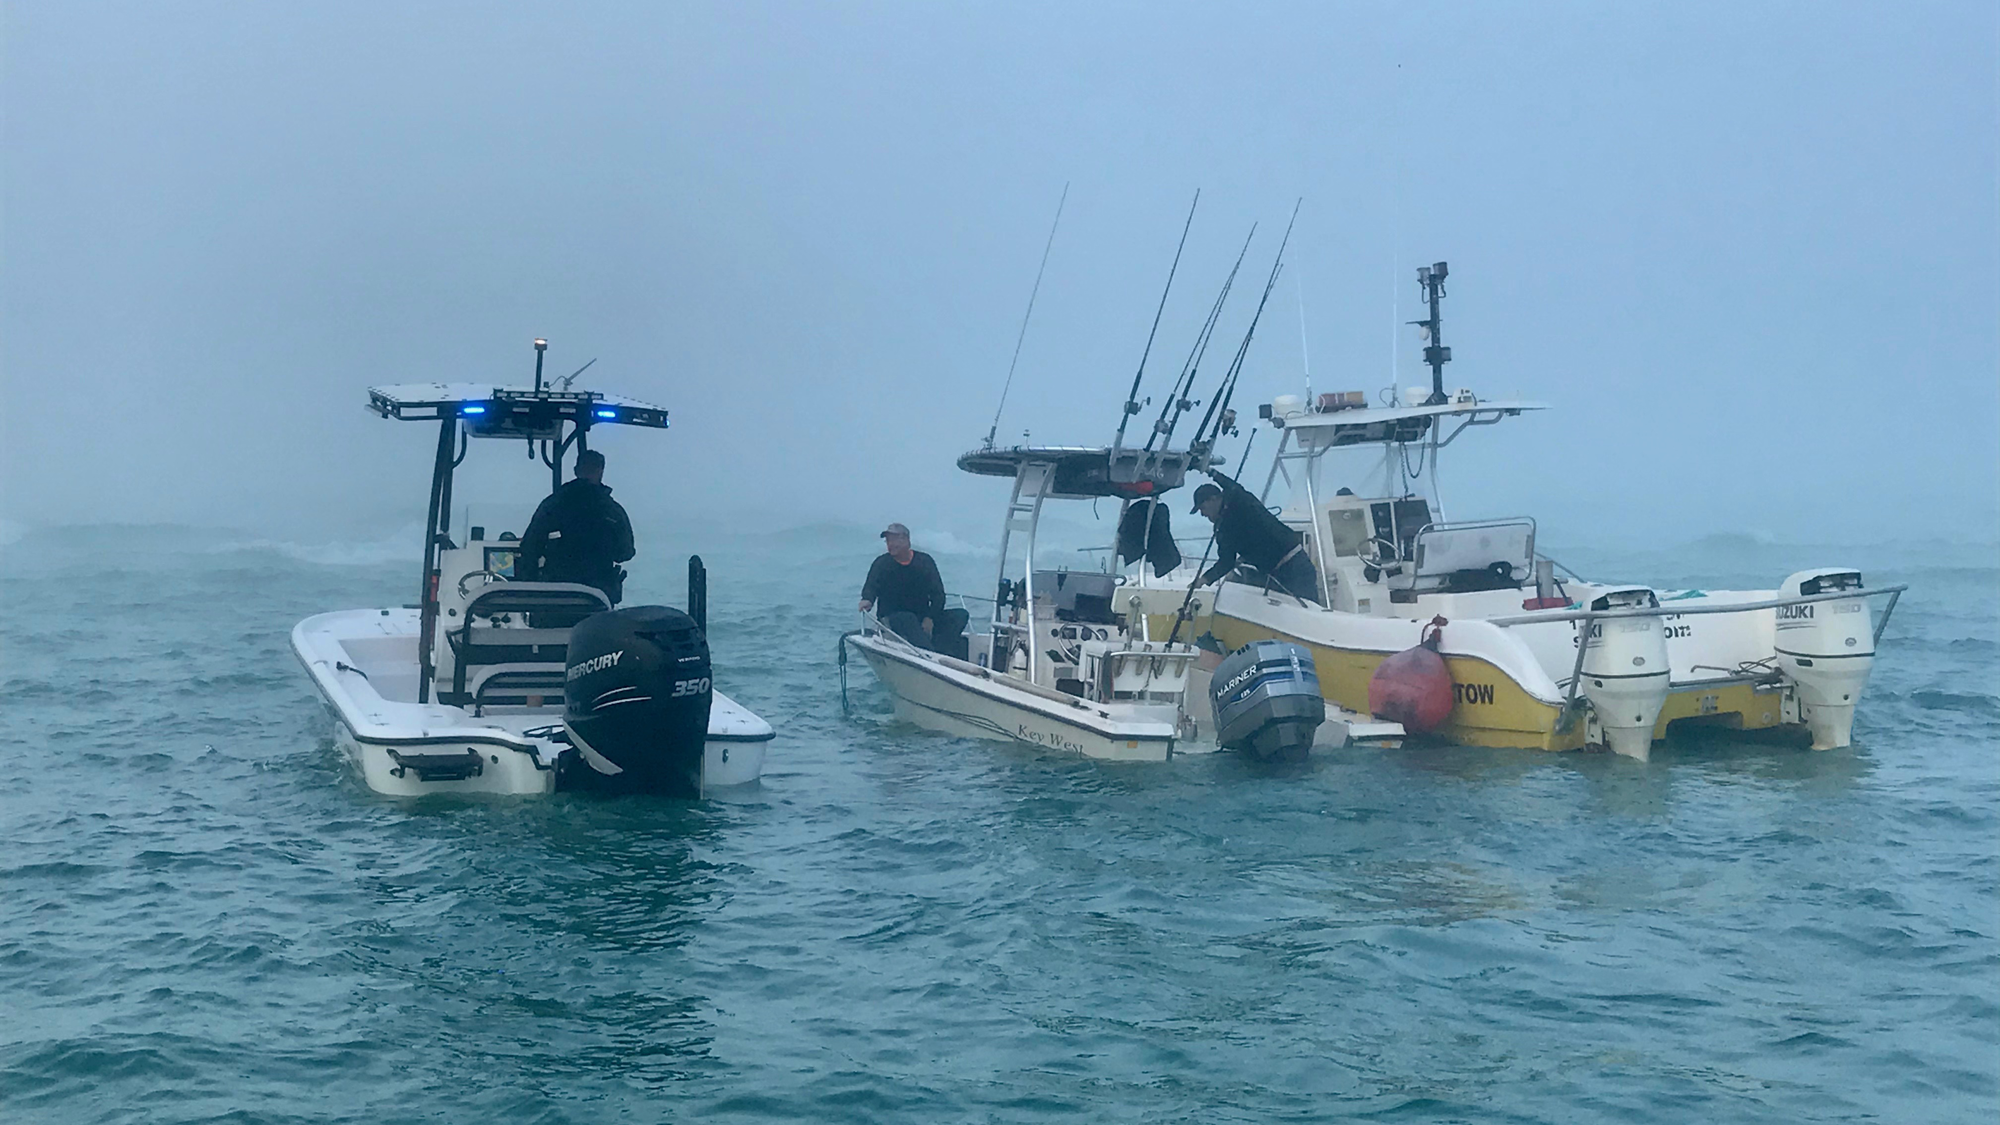 Sarasota Police Department marine officer Michael Skinner and Longboat Key marine patrol officer Joshua Connors helped rescue two people whose boat hit a sandbar on Jan. 23 near New Pass.